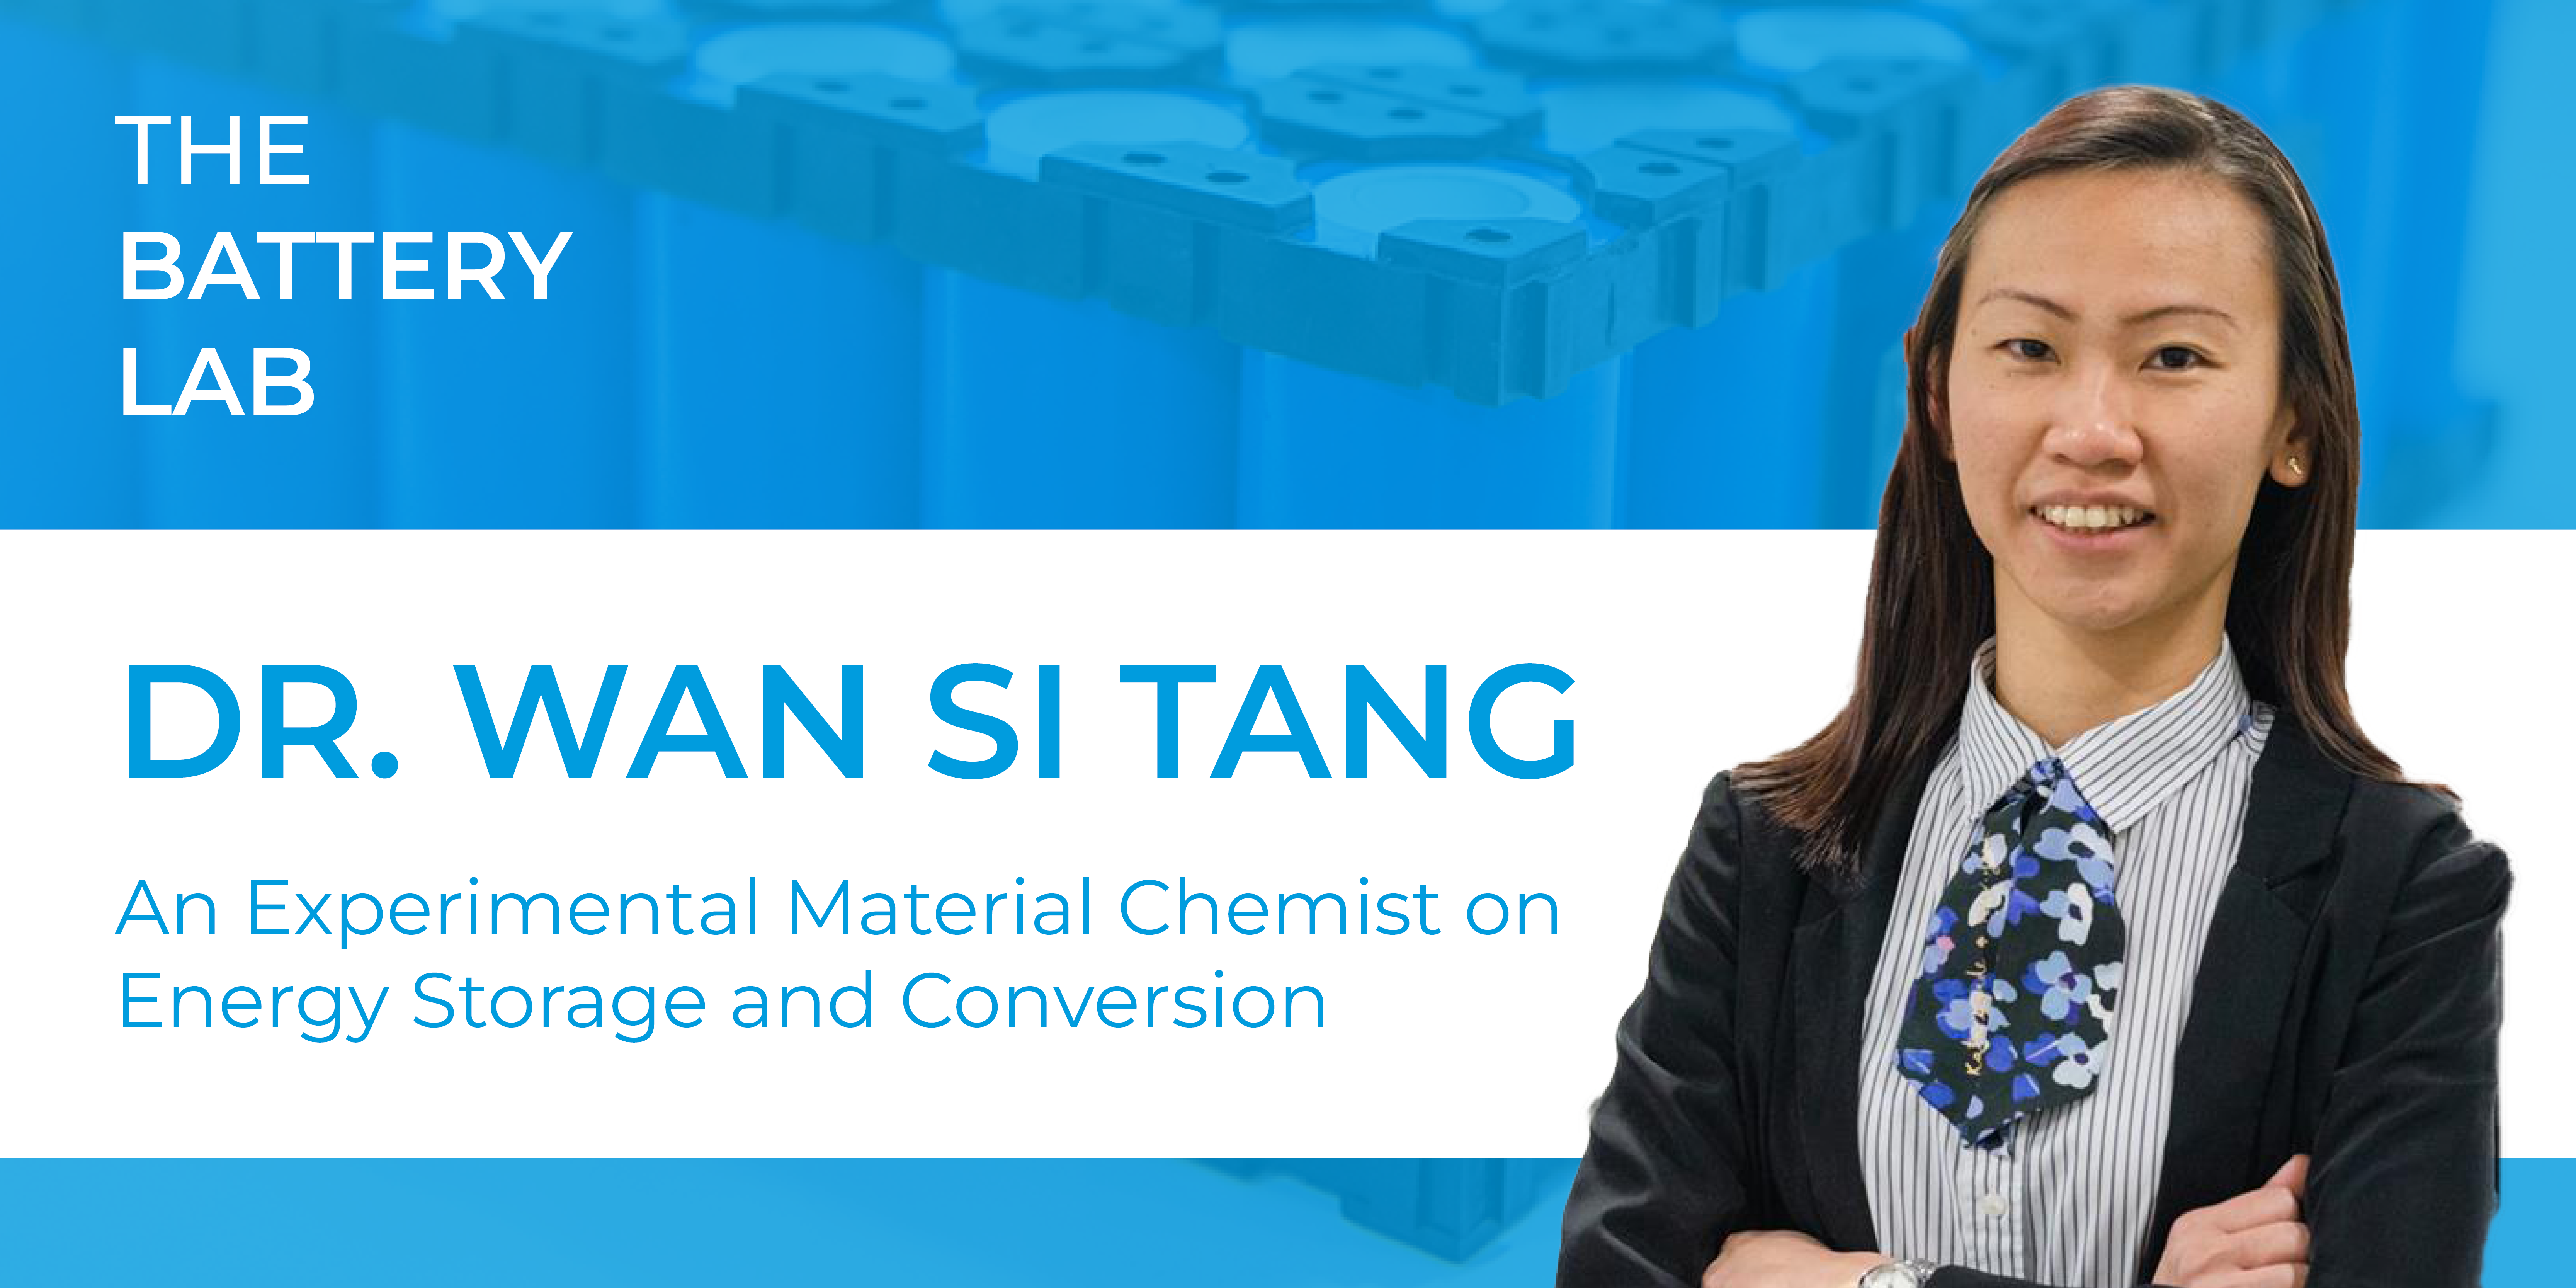 Energy Storage and Conversion with Experimental Material Chemist, Dr. Wan Si Tang